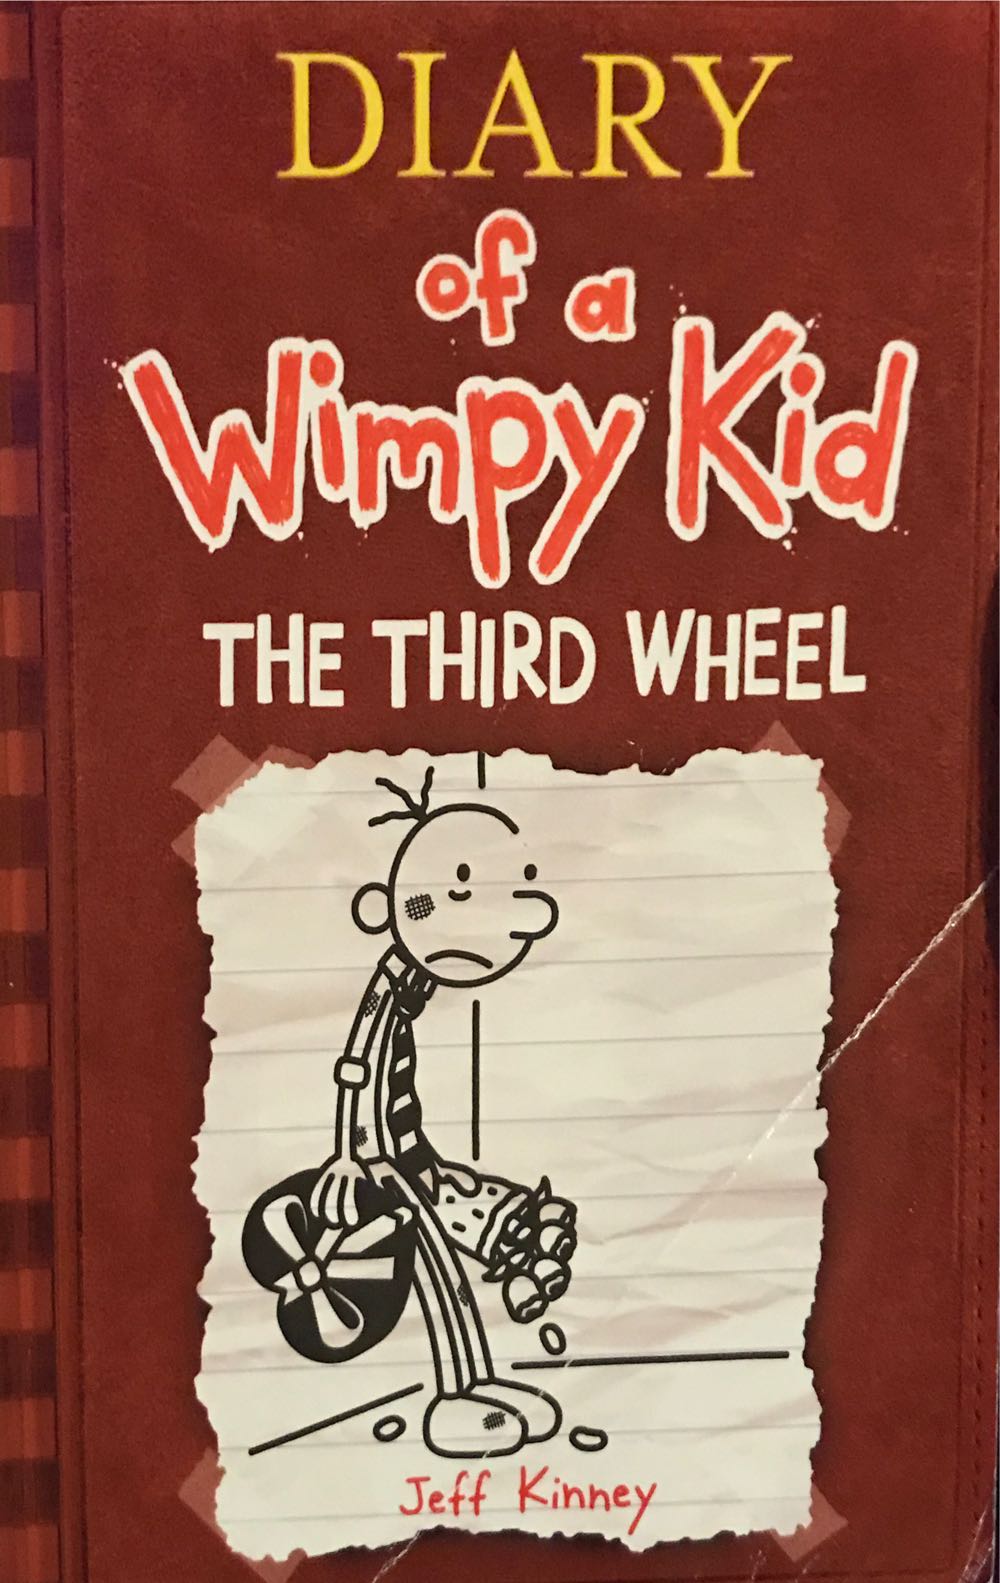 Diary Of A Wimpy Kid The Third Wheel - Jeff Kinney (Amulet Books - Paperback) book collectible [Barcode 9781419707292] - Main Image 3